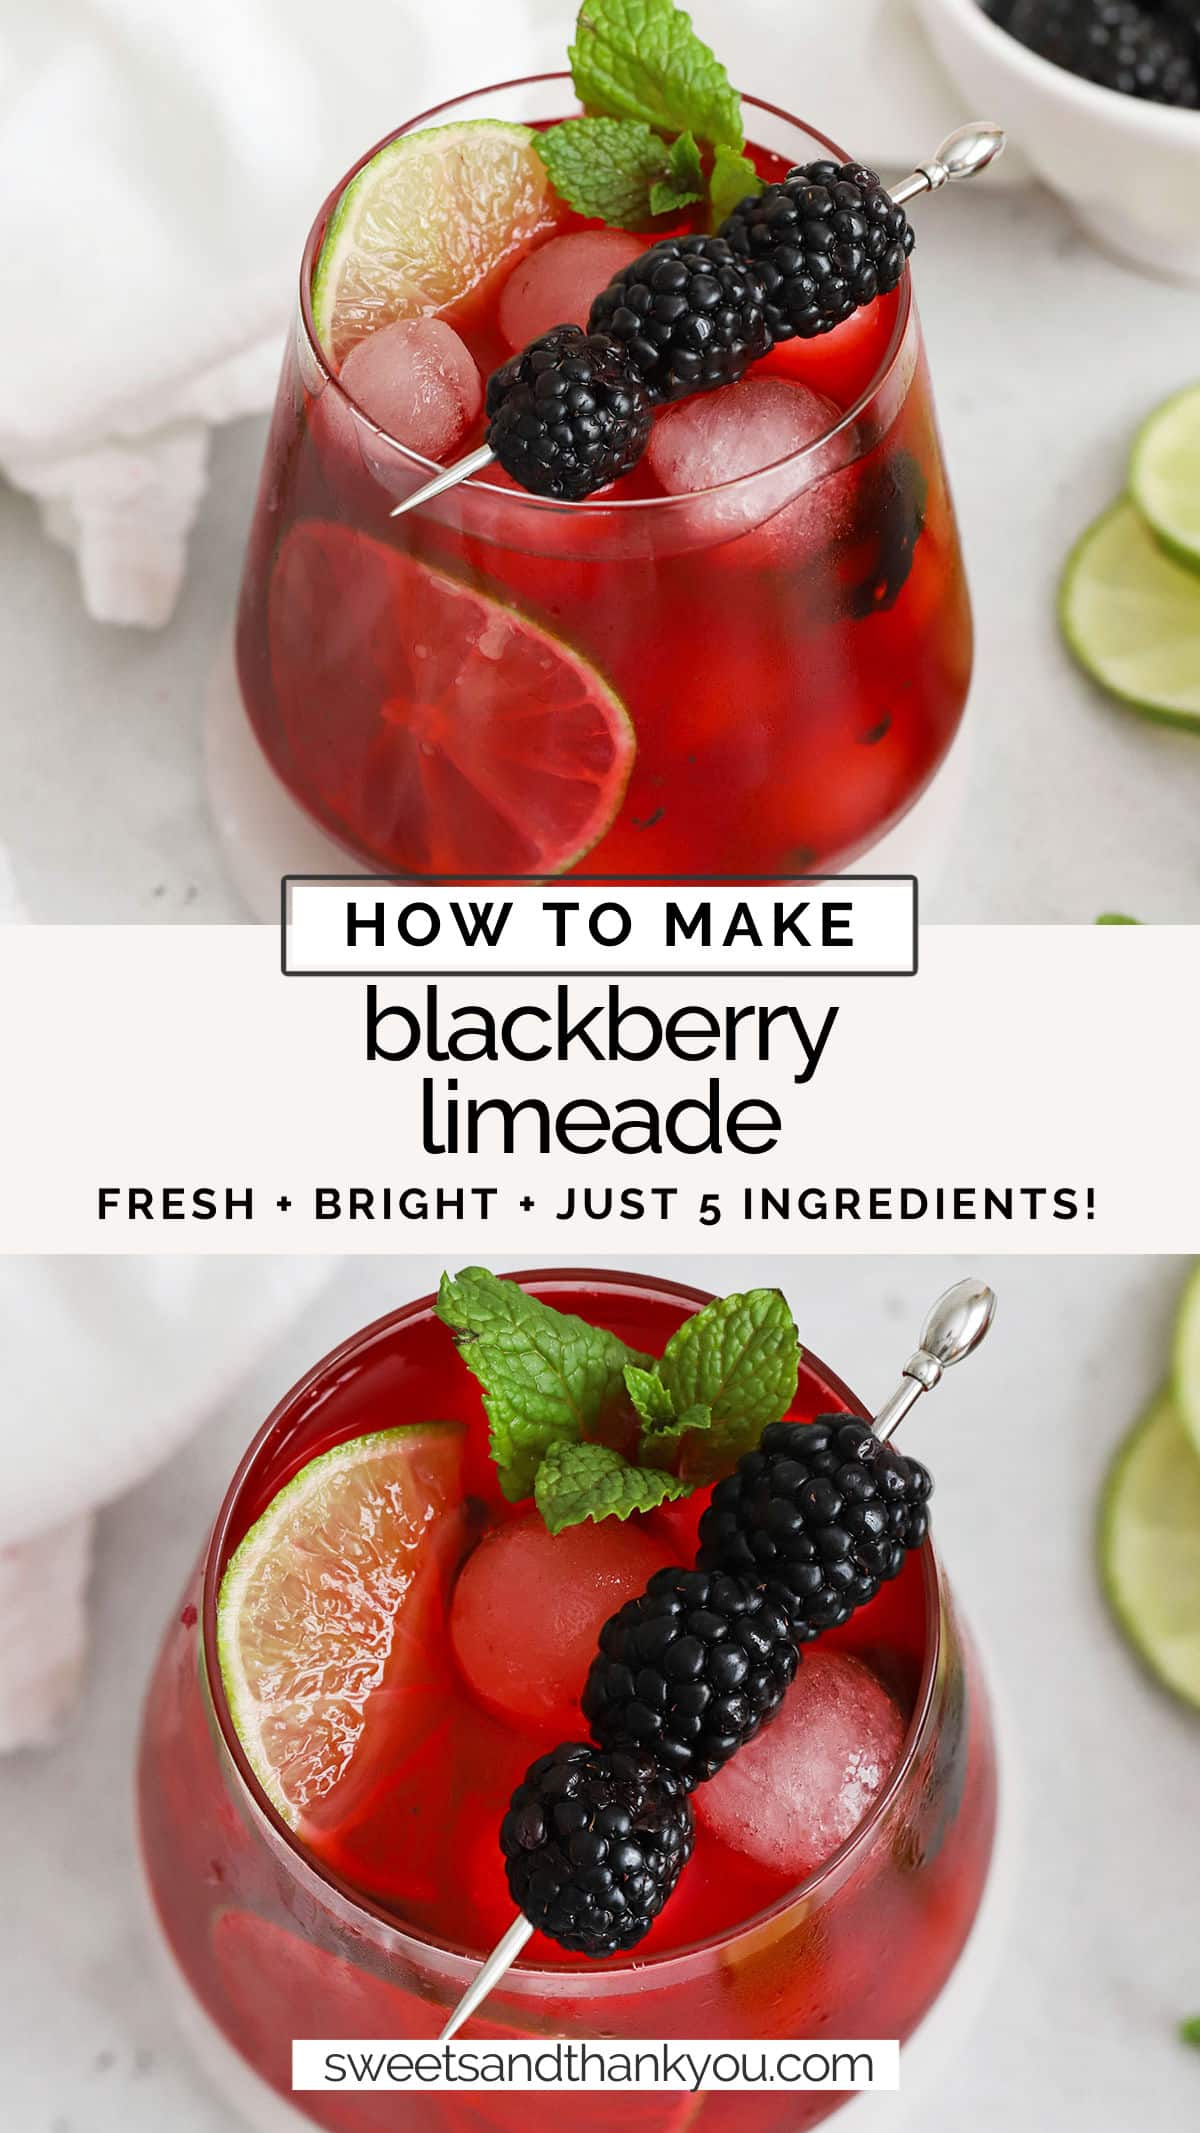 Our easy Blackberry Limeade recipe is the perfect drink to cool off with. You only need 5 ingredients to get started! / blackberry lemonade / homemade blackberry limeade / summer drink / blackberry mocktail / blackberry mojito mocktail / virgin blackberry mojito / 5 ingredient blackberry limeade / berry limeade / spring drink / summer mocktail recipe / blackberry drinks / blackberry recipe / blackberry mocktail recipe / 